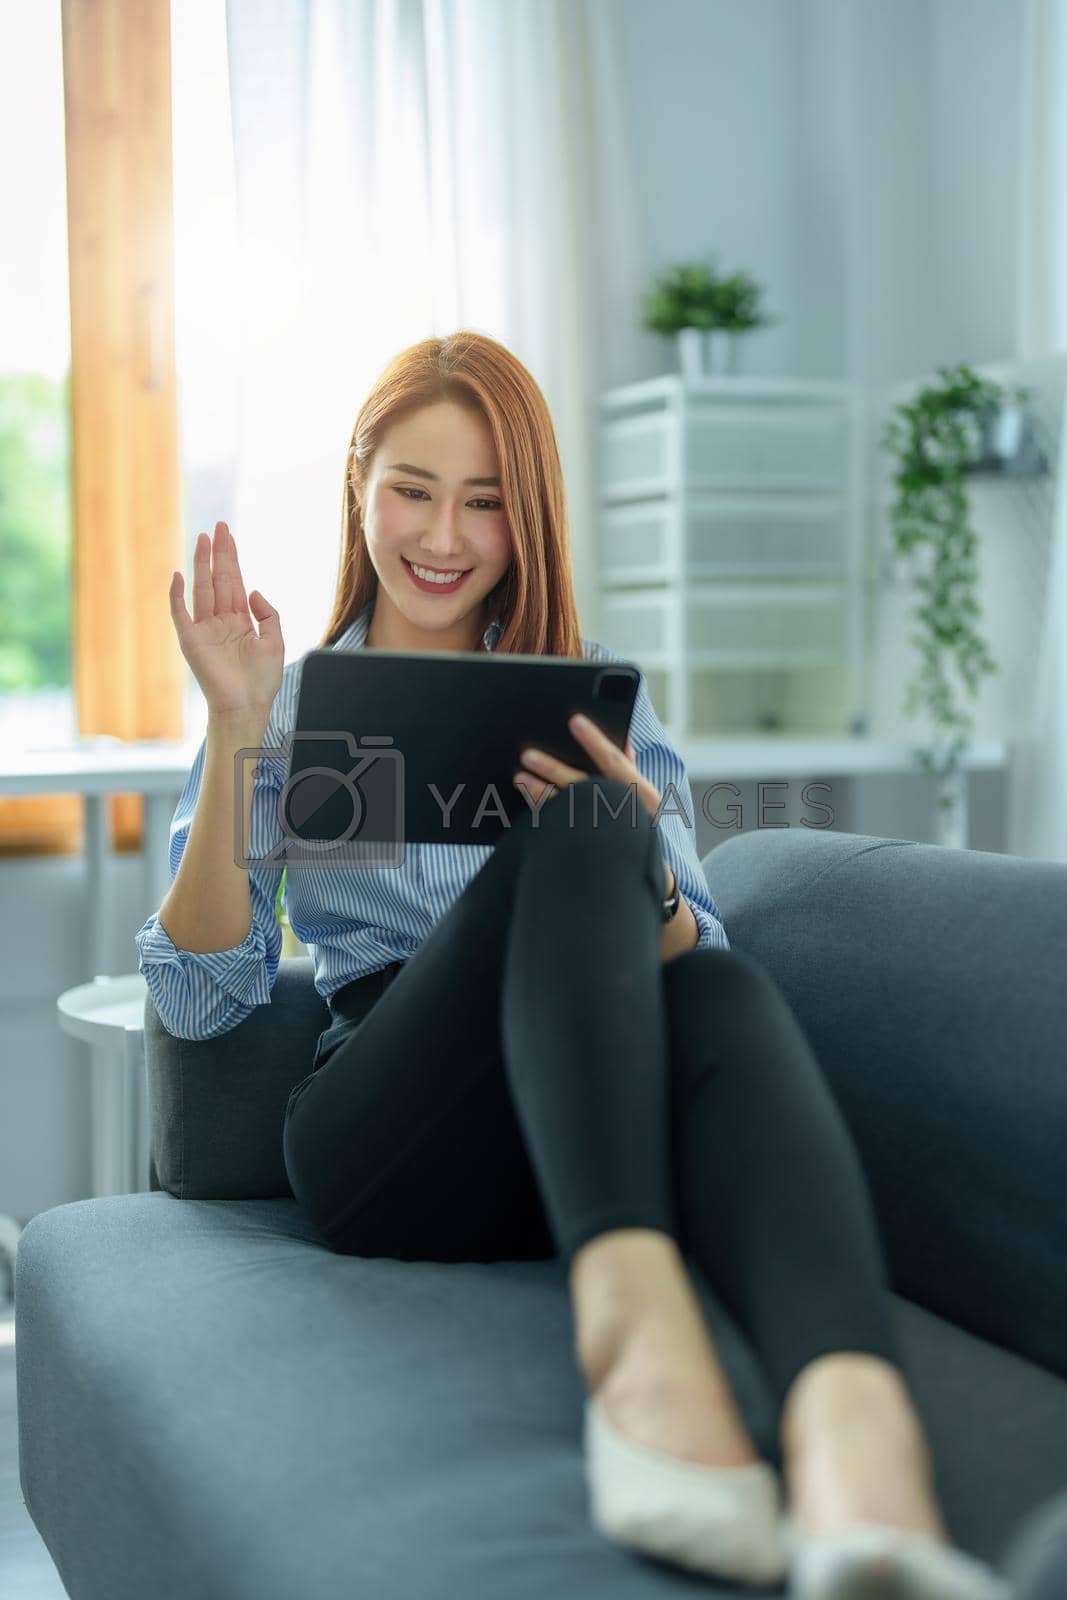 Royalty free image of Conversation, online teaching, explaining, meeting, business owner, portrait of an Asian woman using a tablet for video conference with colleagues. work from home in the era of corona virus by Manastrong